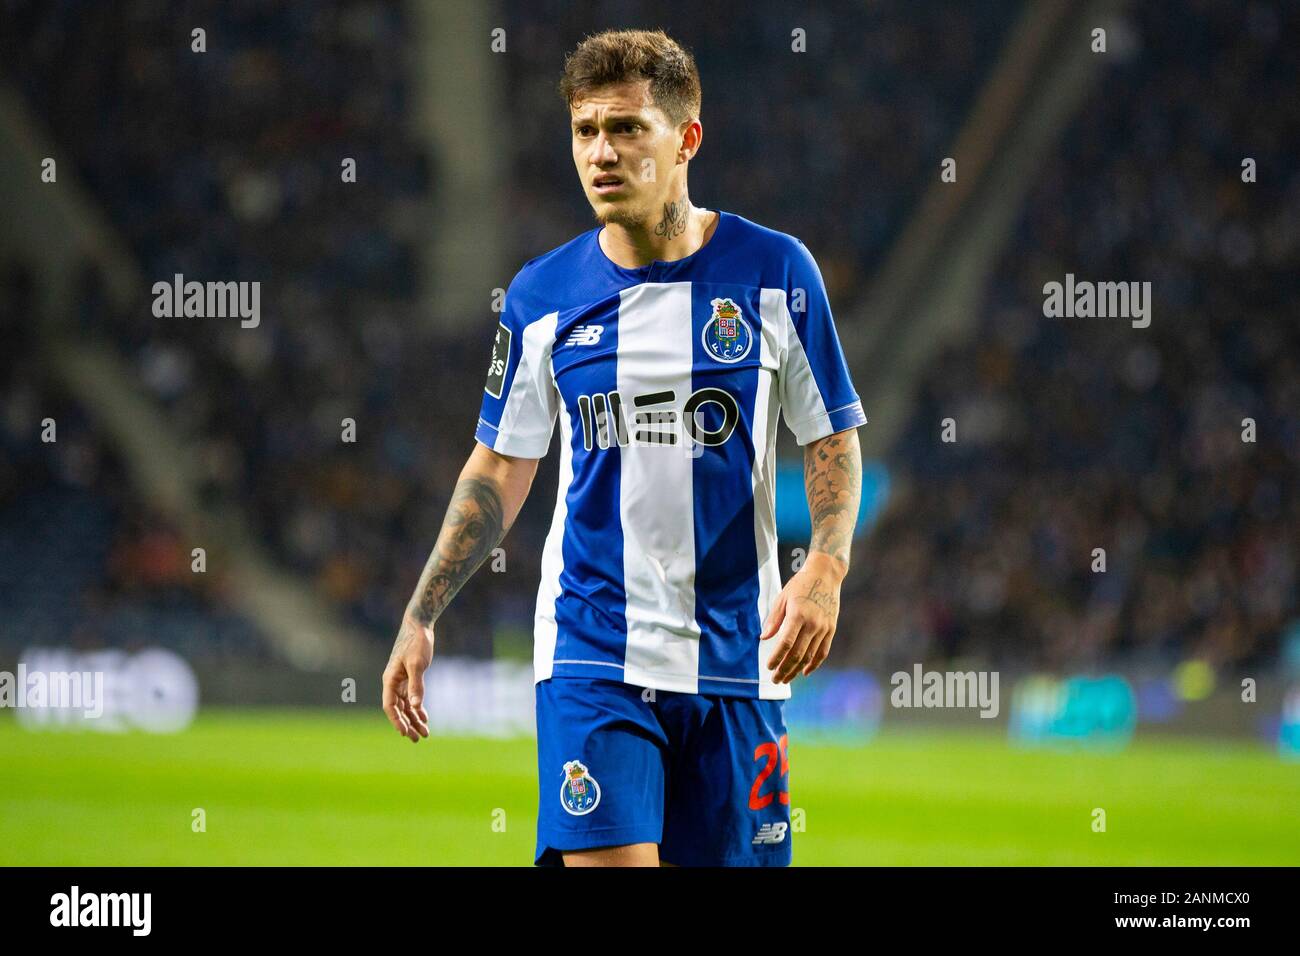 Porto, Portugal. 17th Jan, 2020. FC Porto's player Otávio seen in action  during the match for the portuguese first league between FC Porto and SC  Braga at Dragon Stadium in Porto. (Final